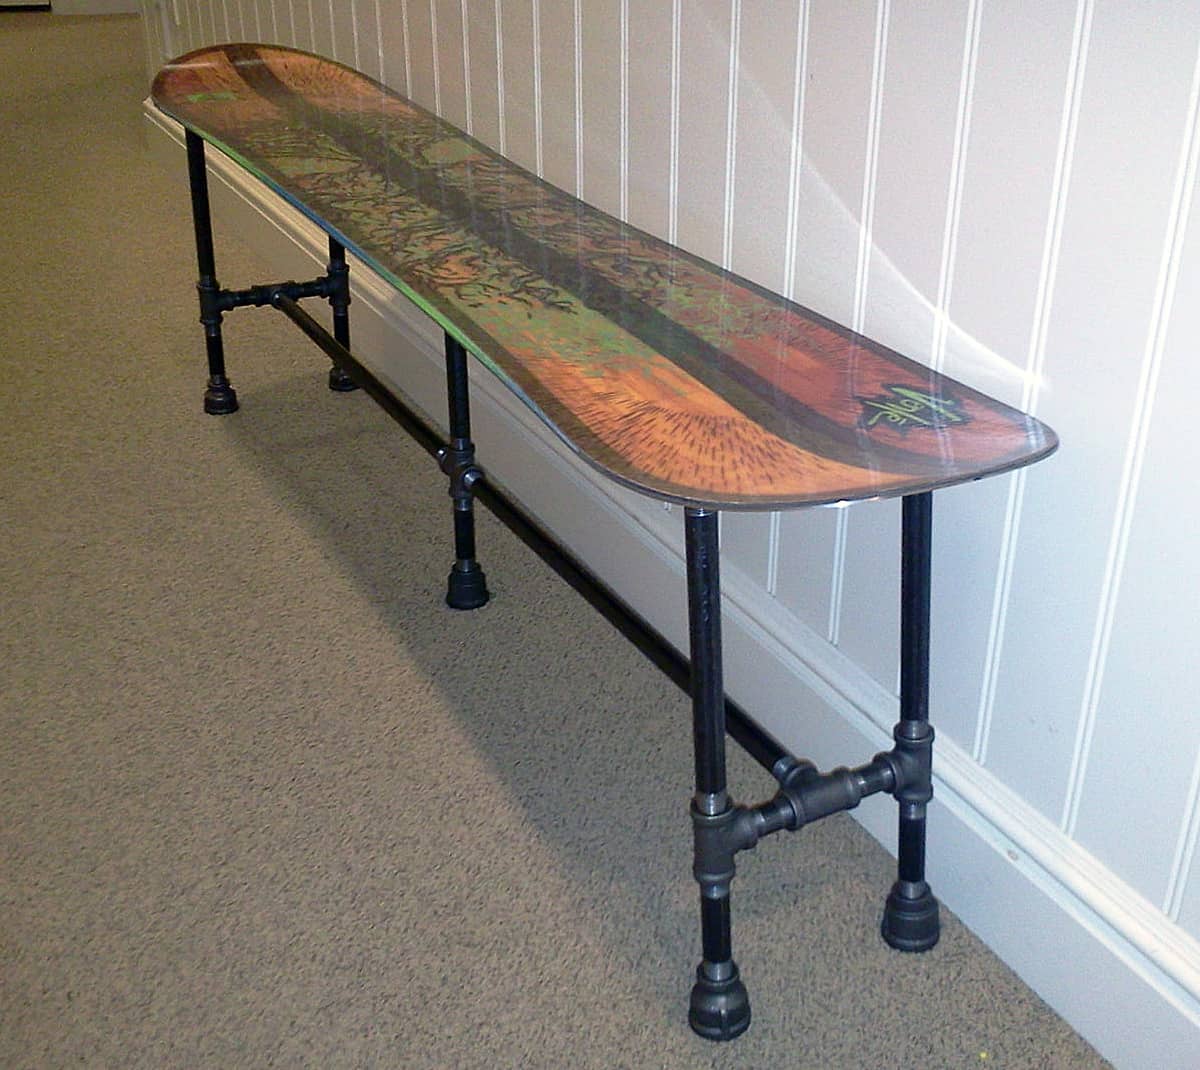 plumbing pipe furniture designs surfboard console 16